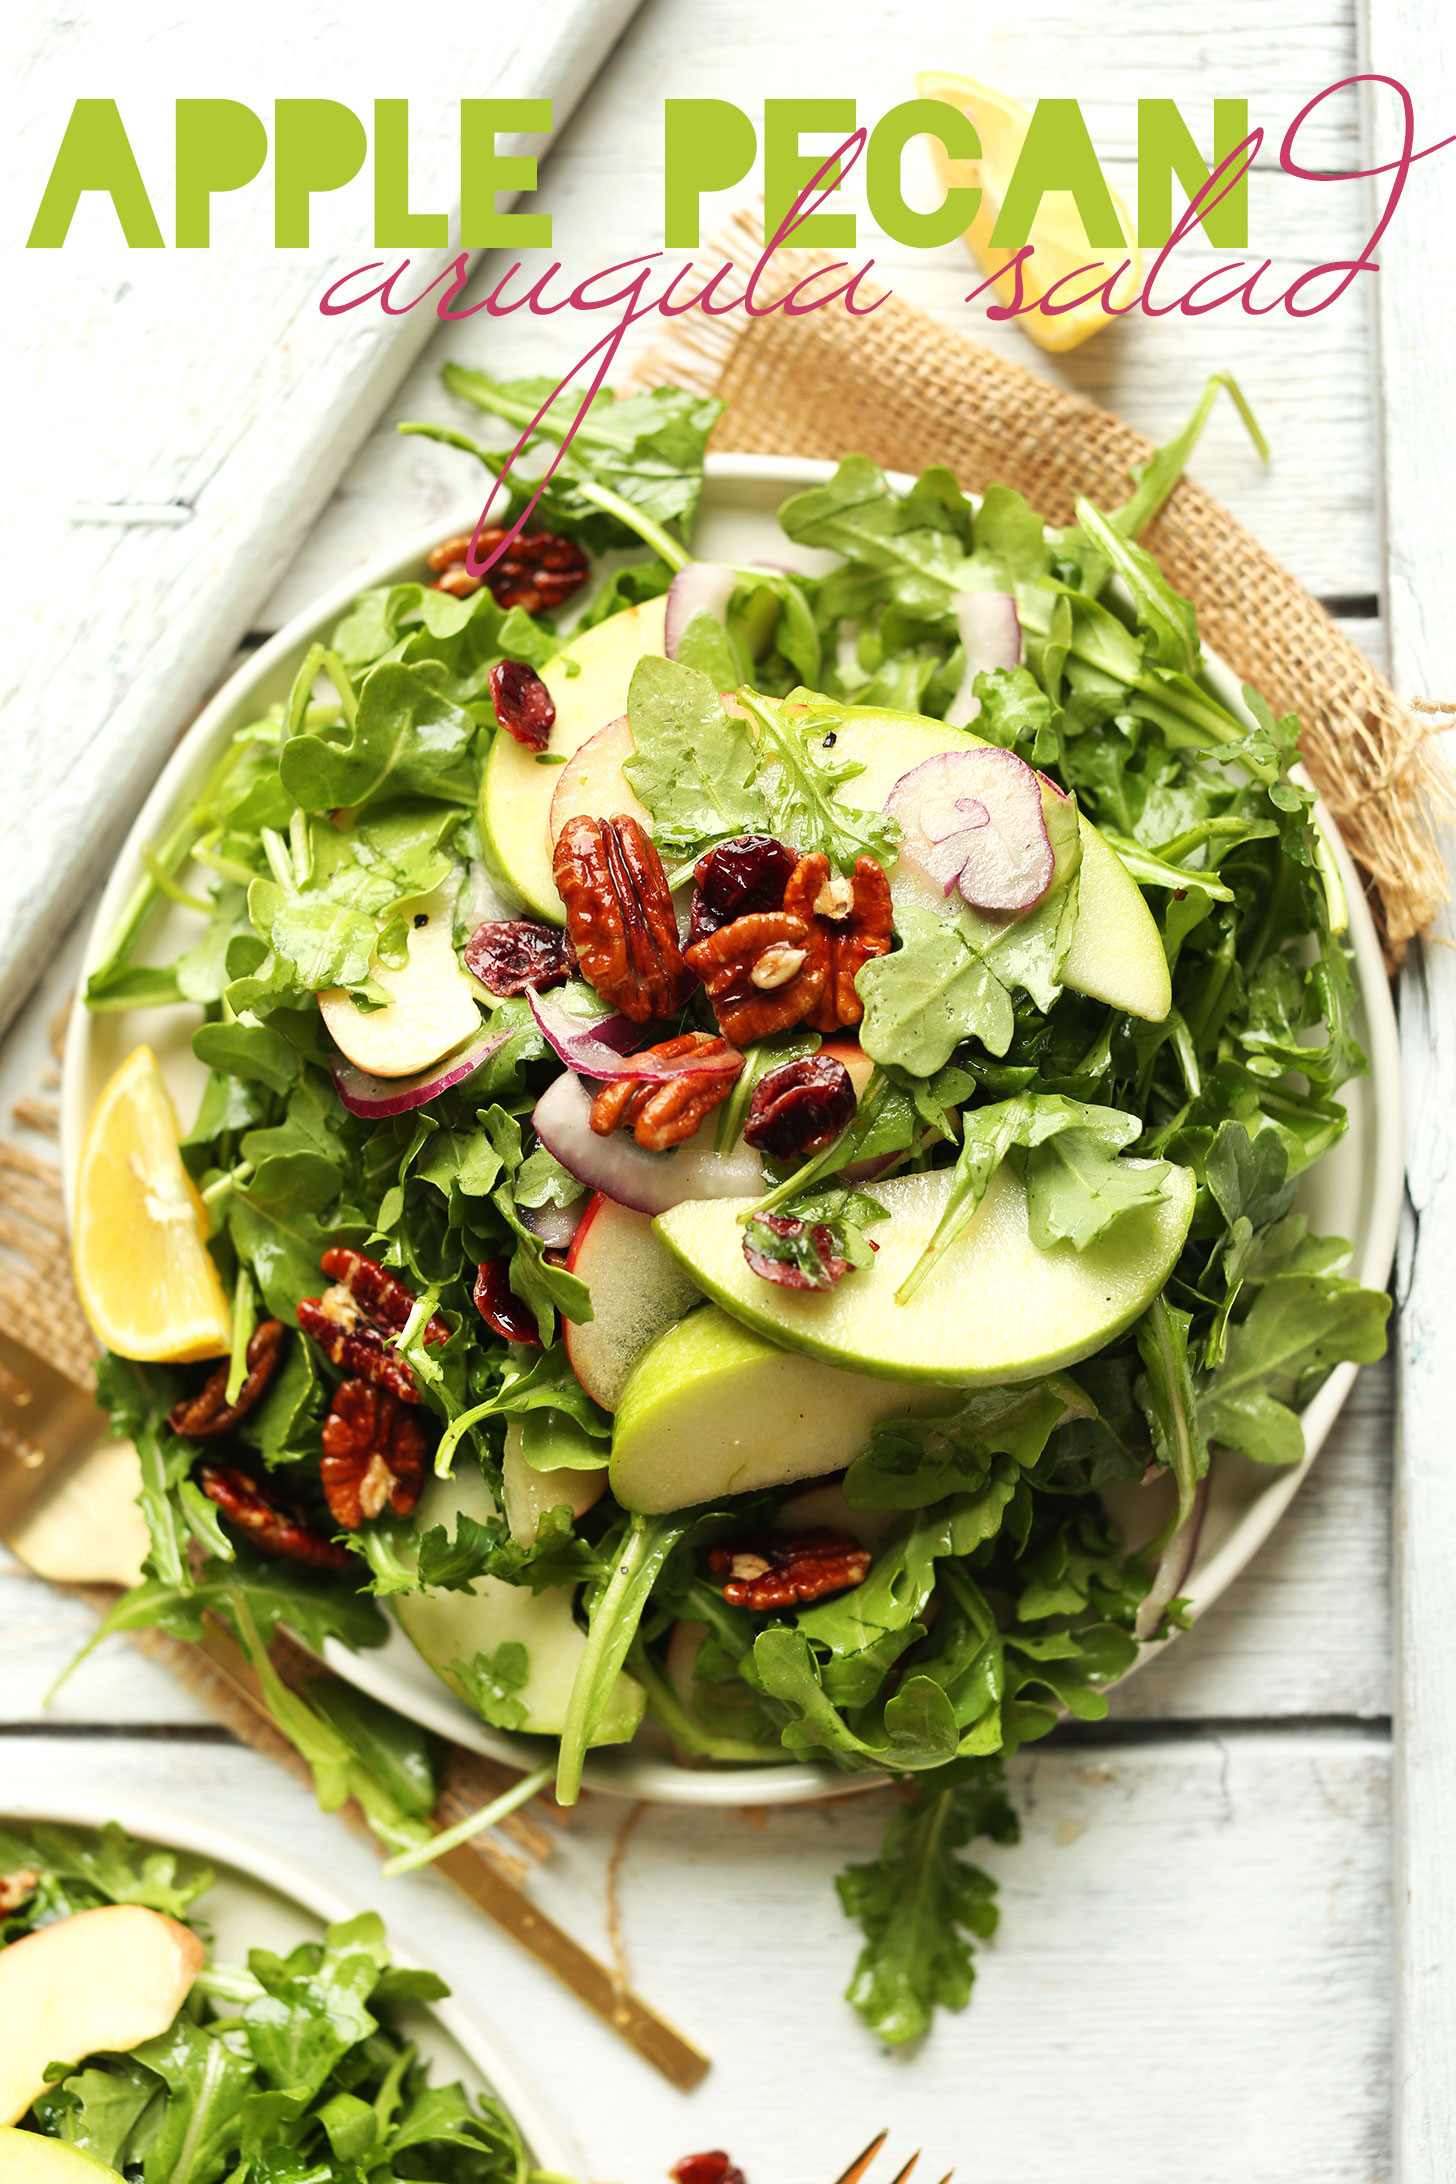 Healthy Fall Dinner Recipes
 Simple Easy Apple Arugula Salad with Pecans and Lemon